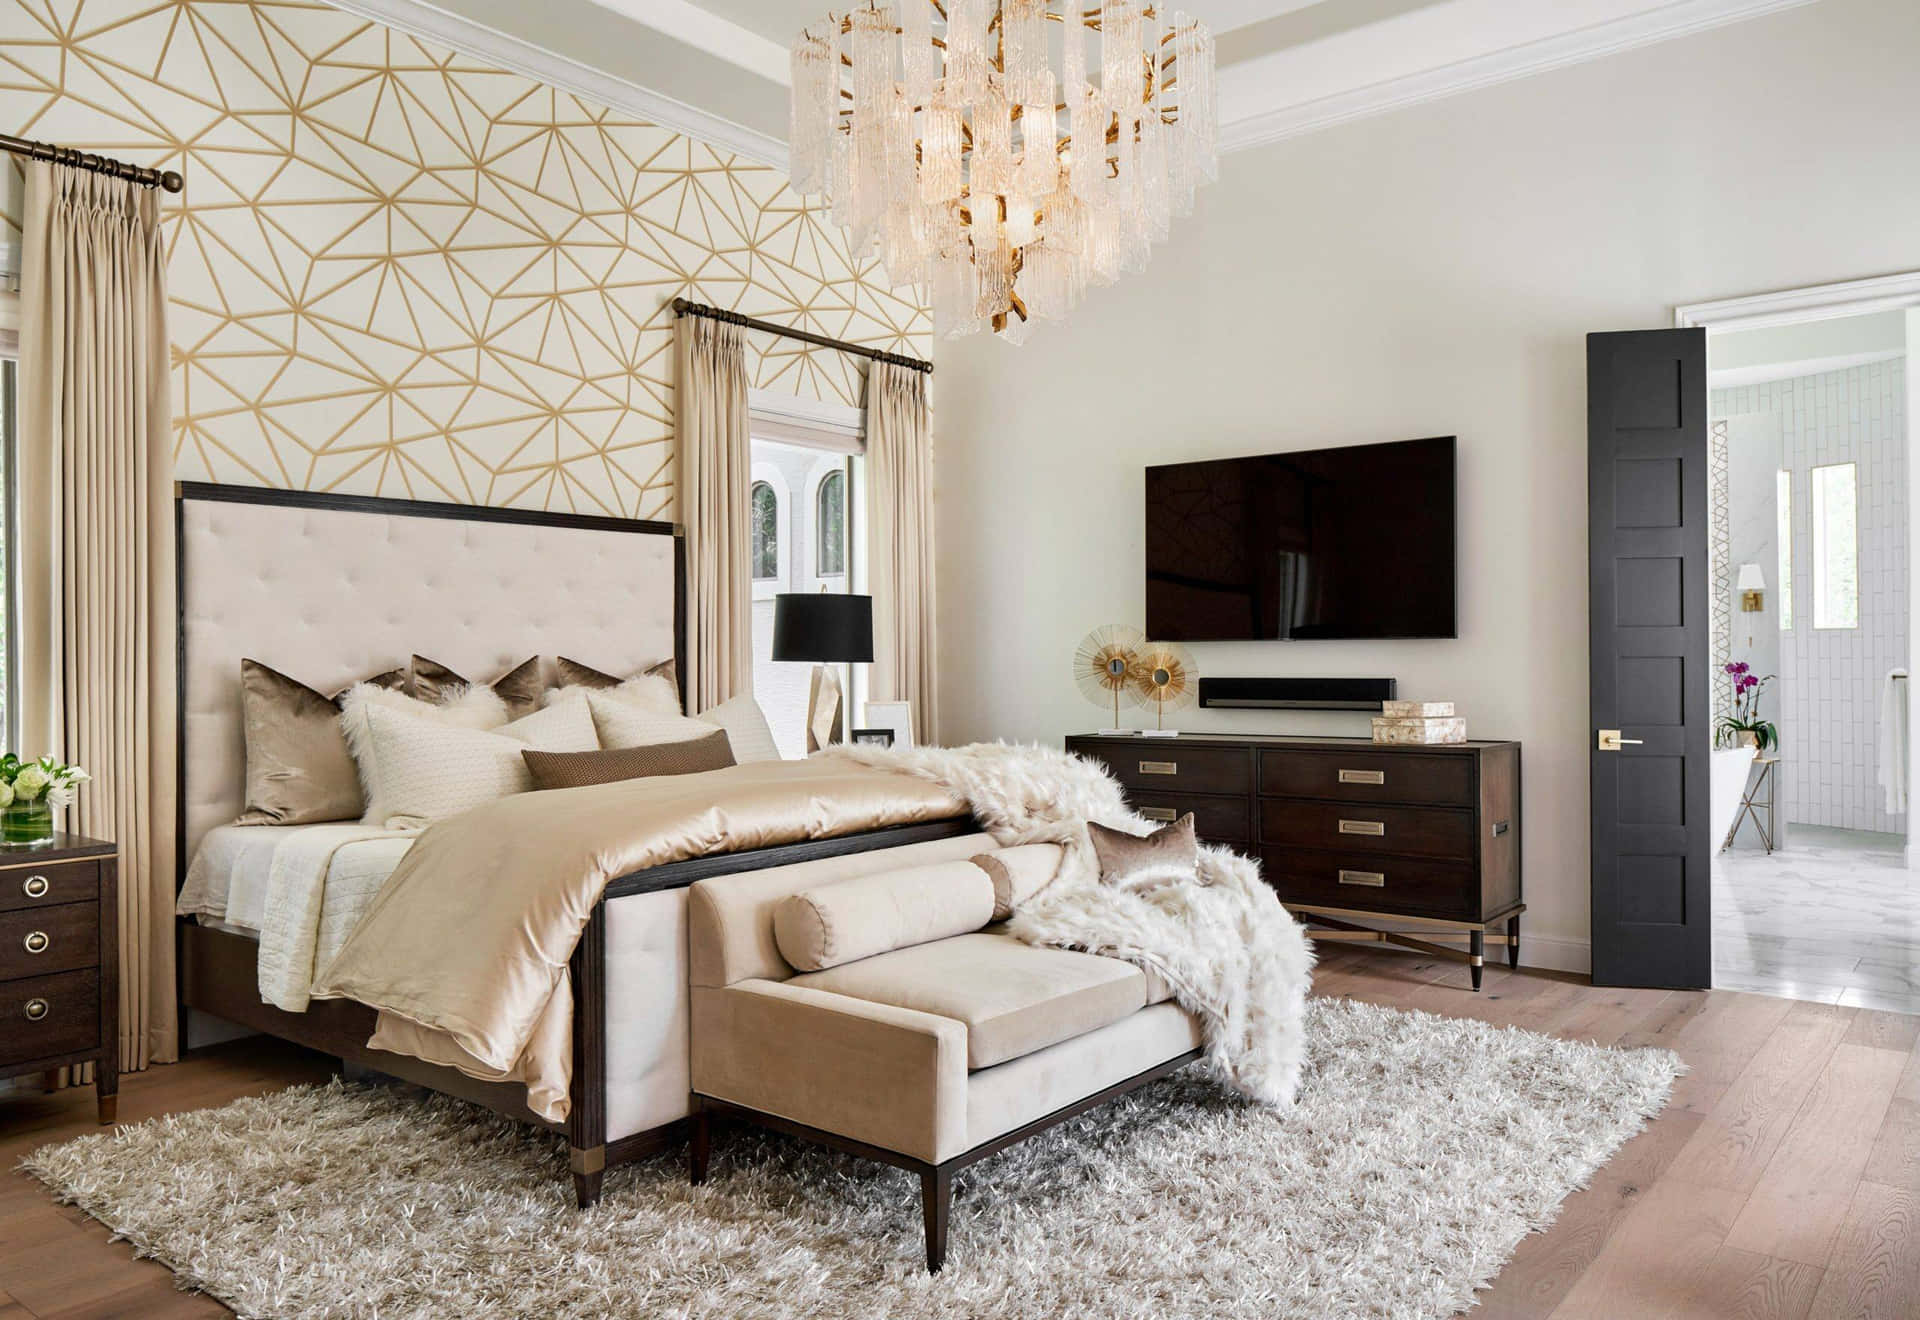 Luxurious Bed Grand Chandeliers Background